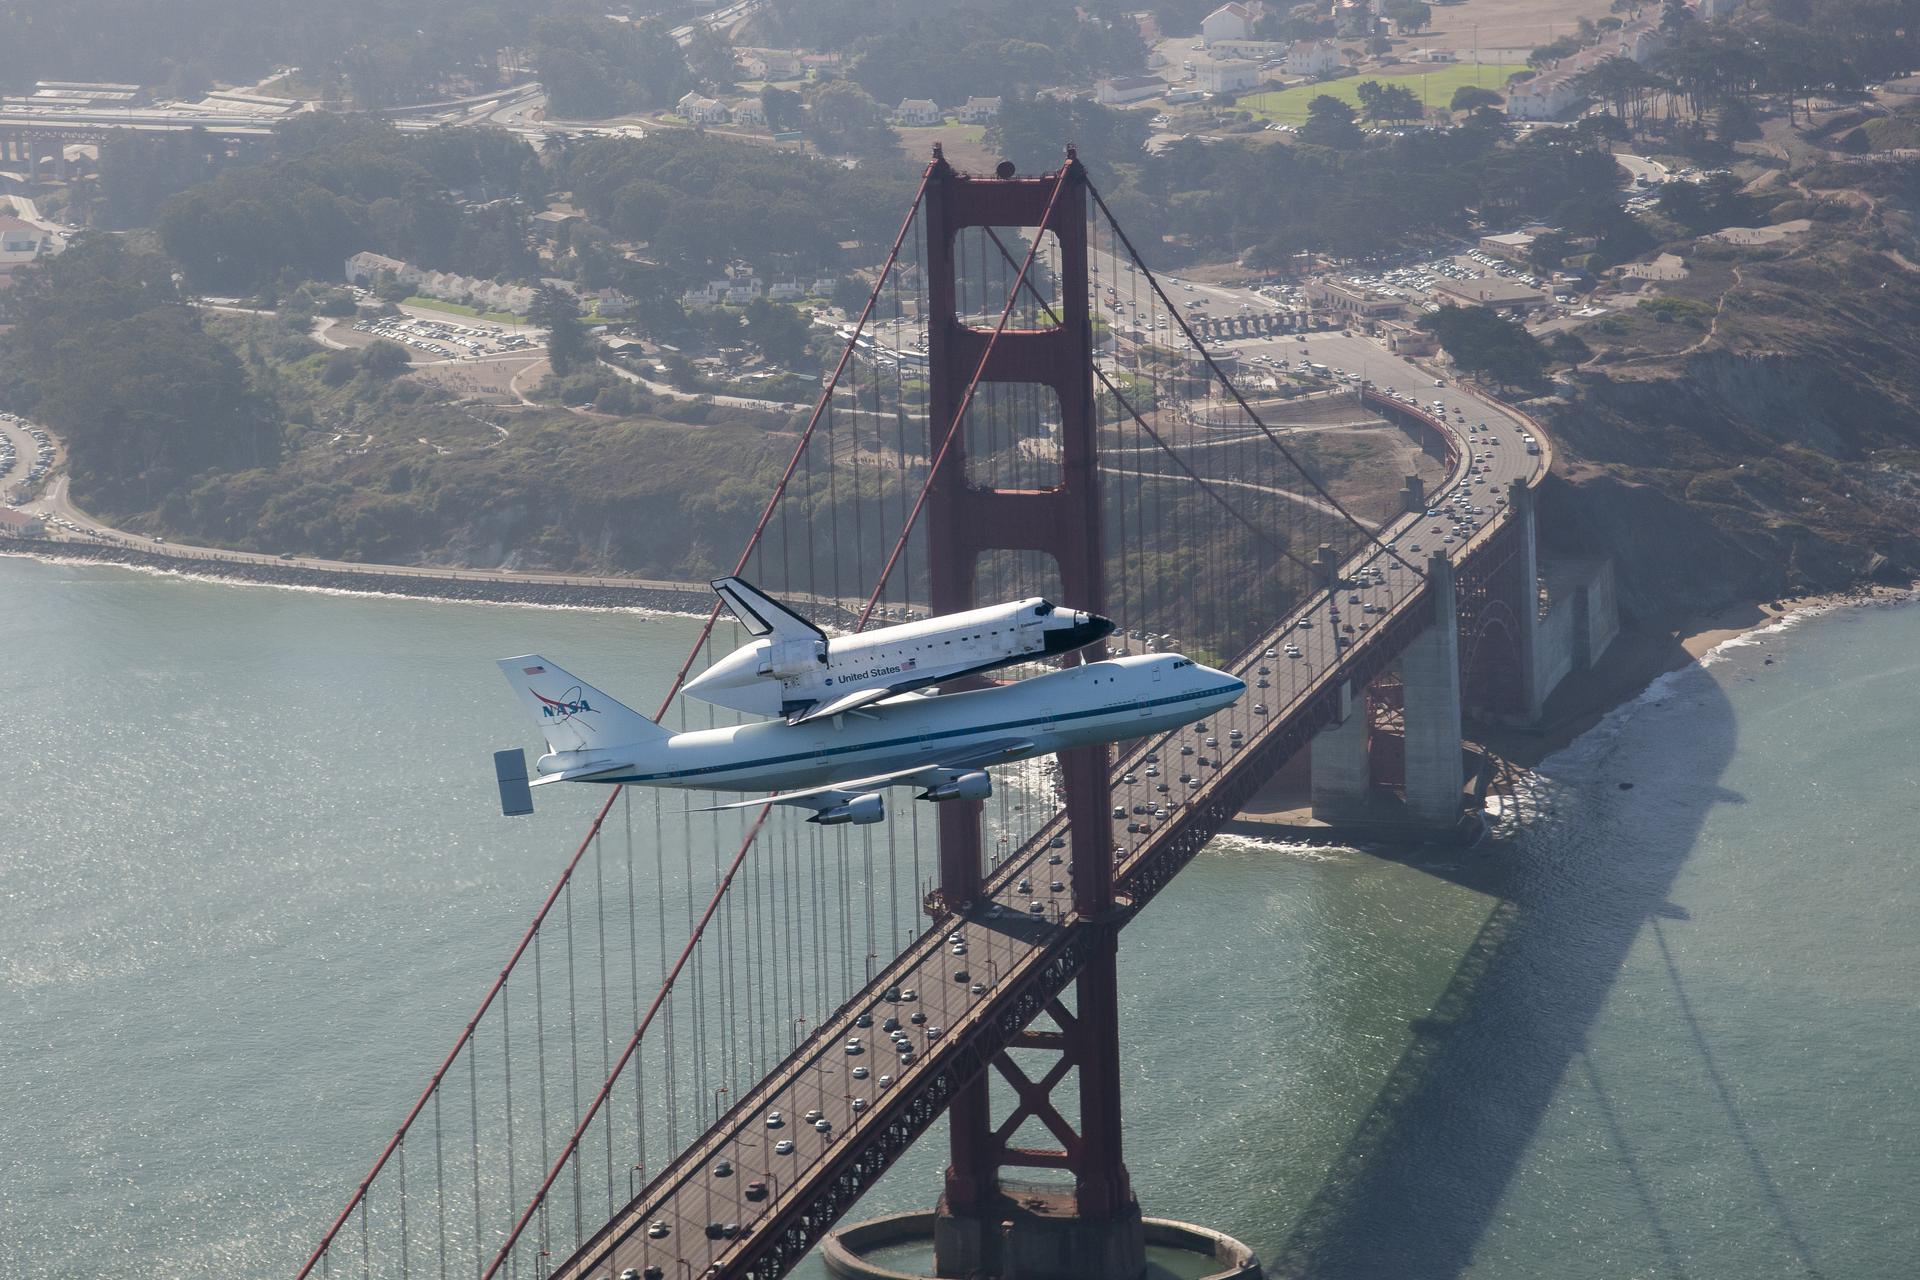 Space shuttle Endeavour and its host NASA 747 Shuttle Carrier Aircraft